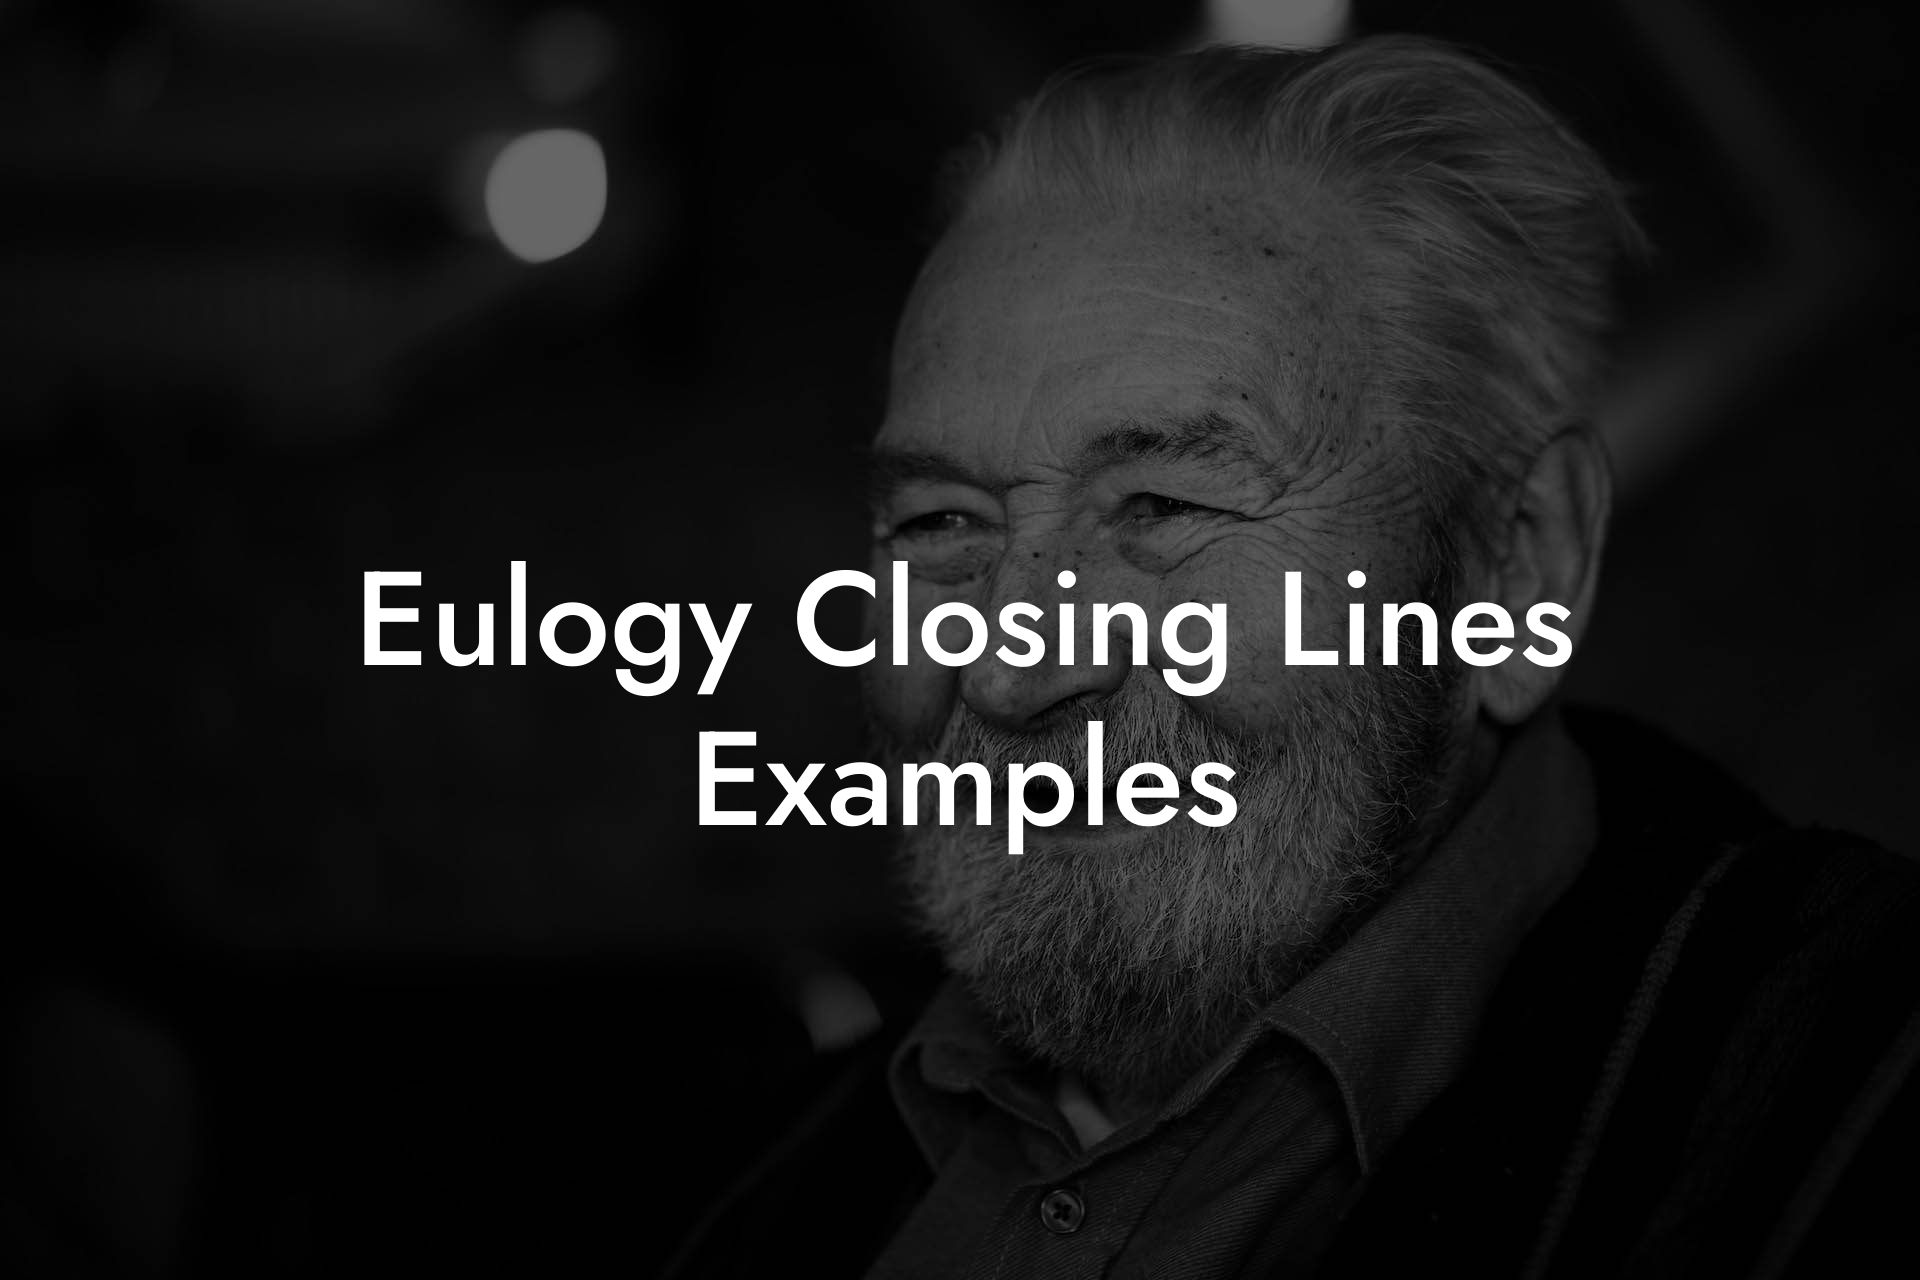 Eulogy Closing Lines Examples